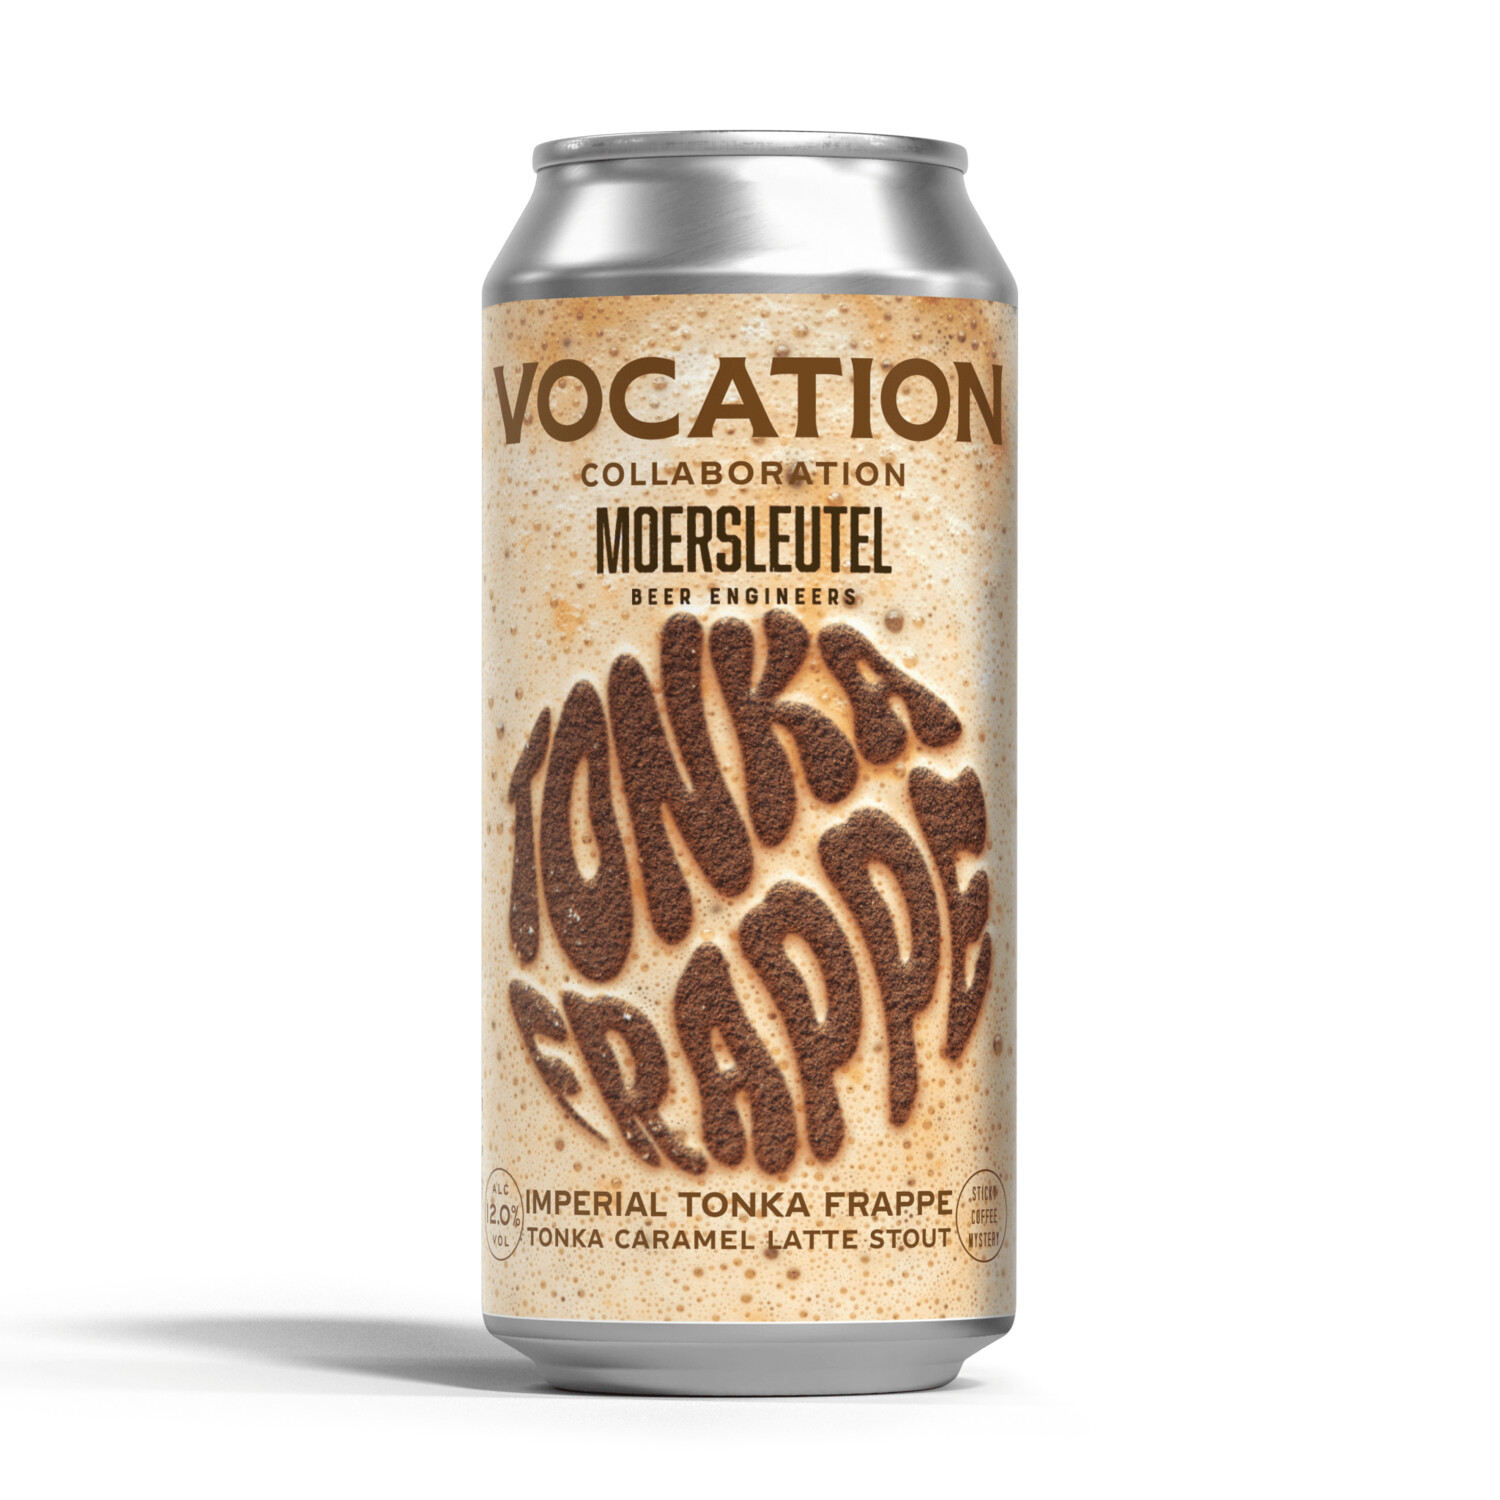 Vocation x Moersleutel Imperial Tonka Frappe Imperial Stout